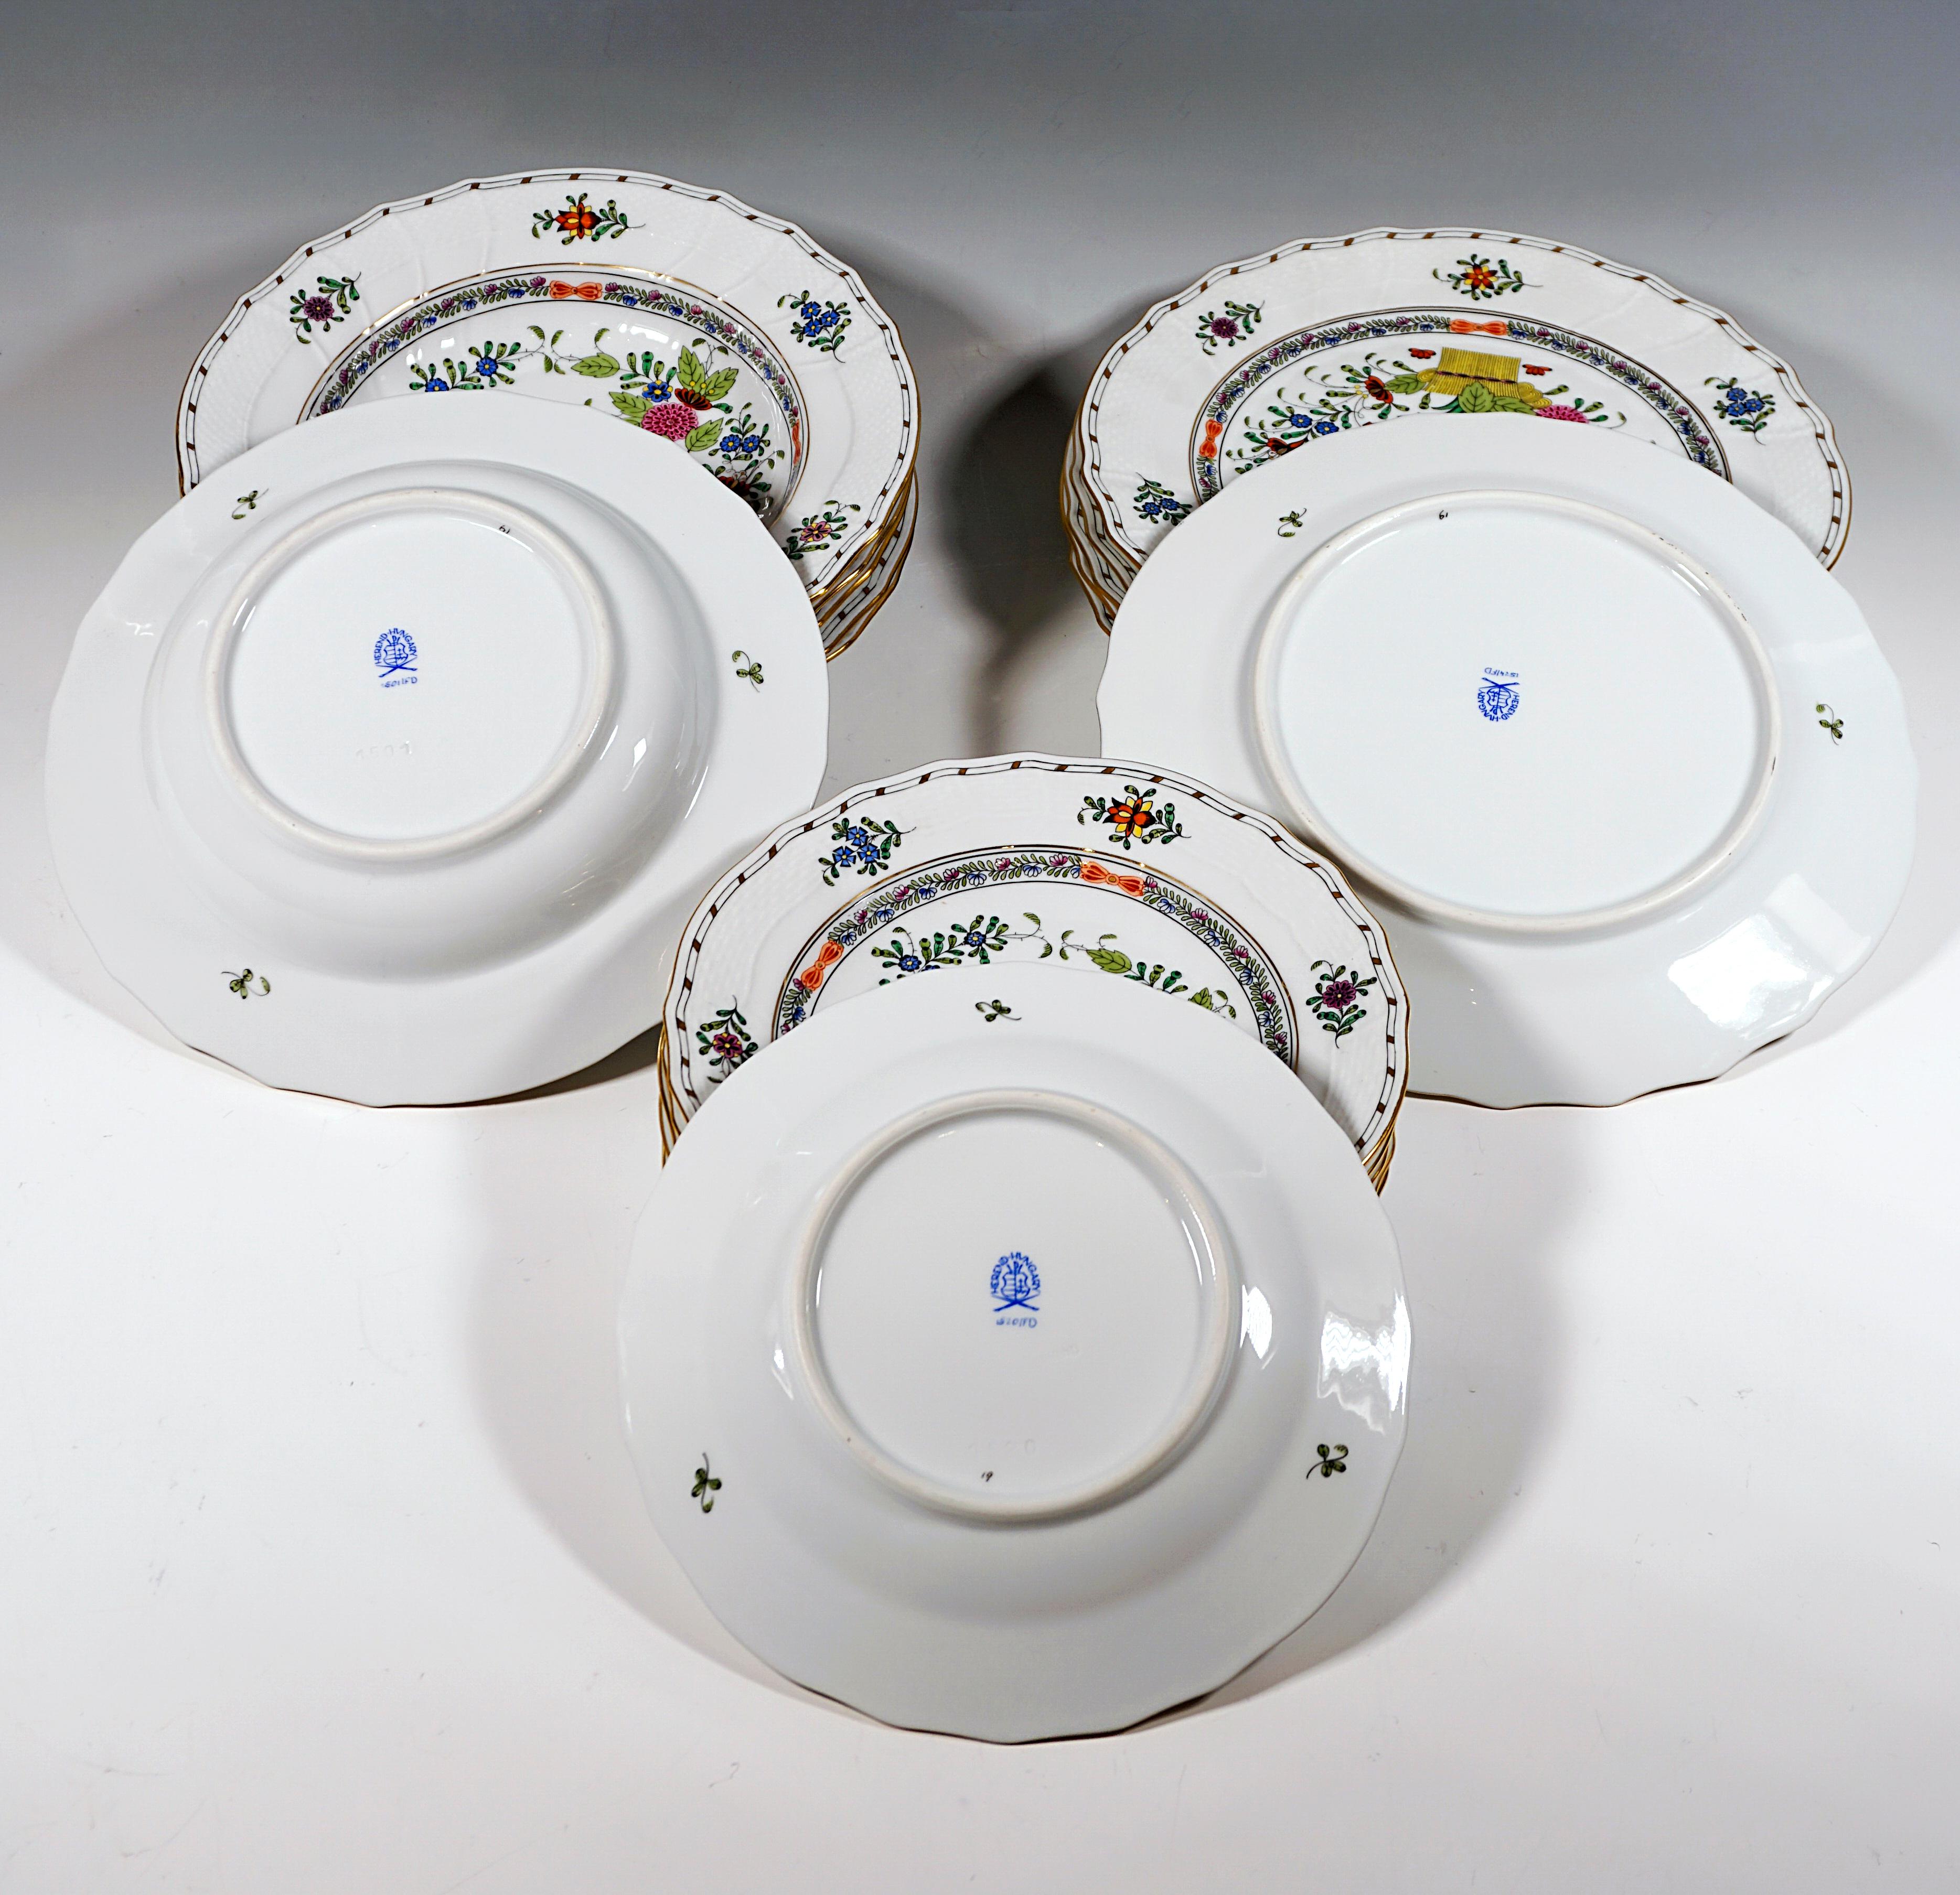 Painted Fleurs Des Indes Dinner Set For 6 Persons, Herend Hungary, 20th Century